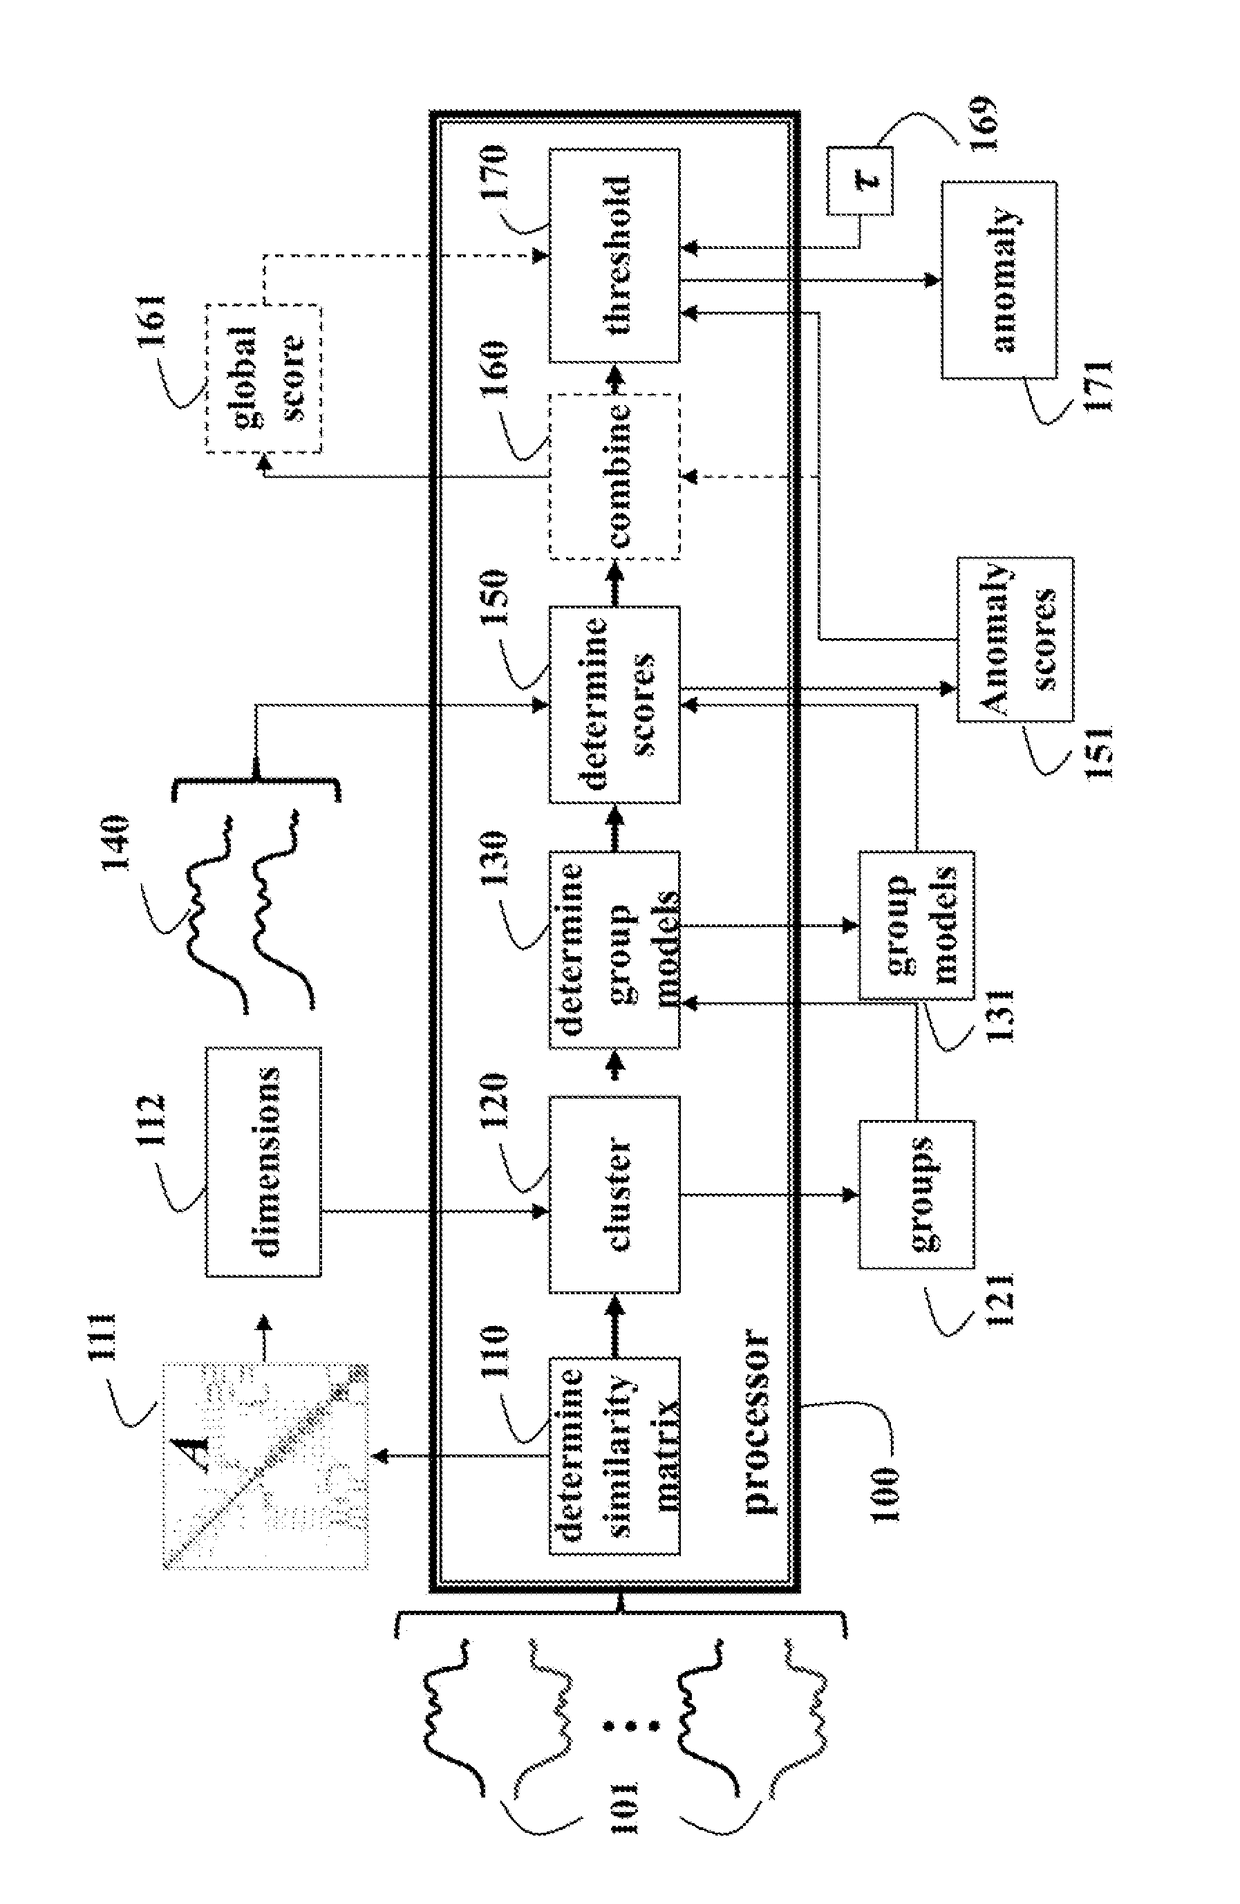 Method for anomaly detection in time series data based on spectral partitioning